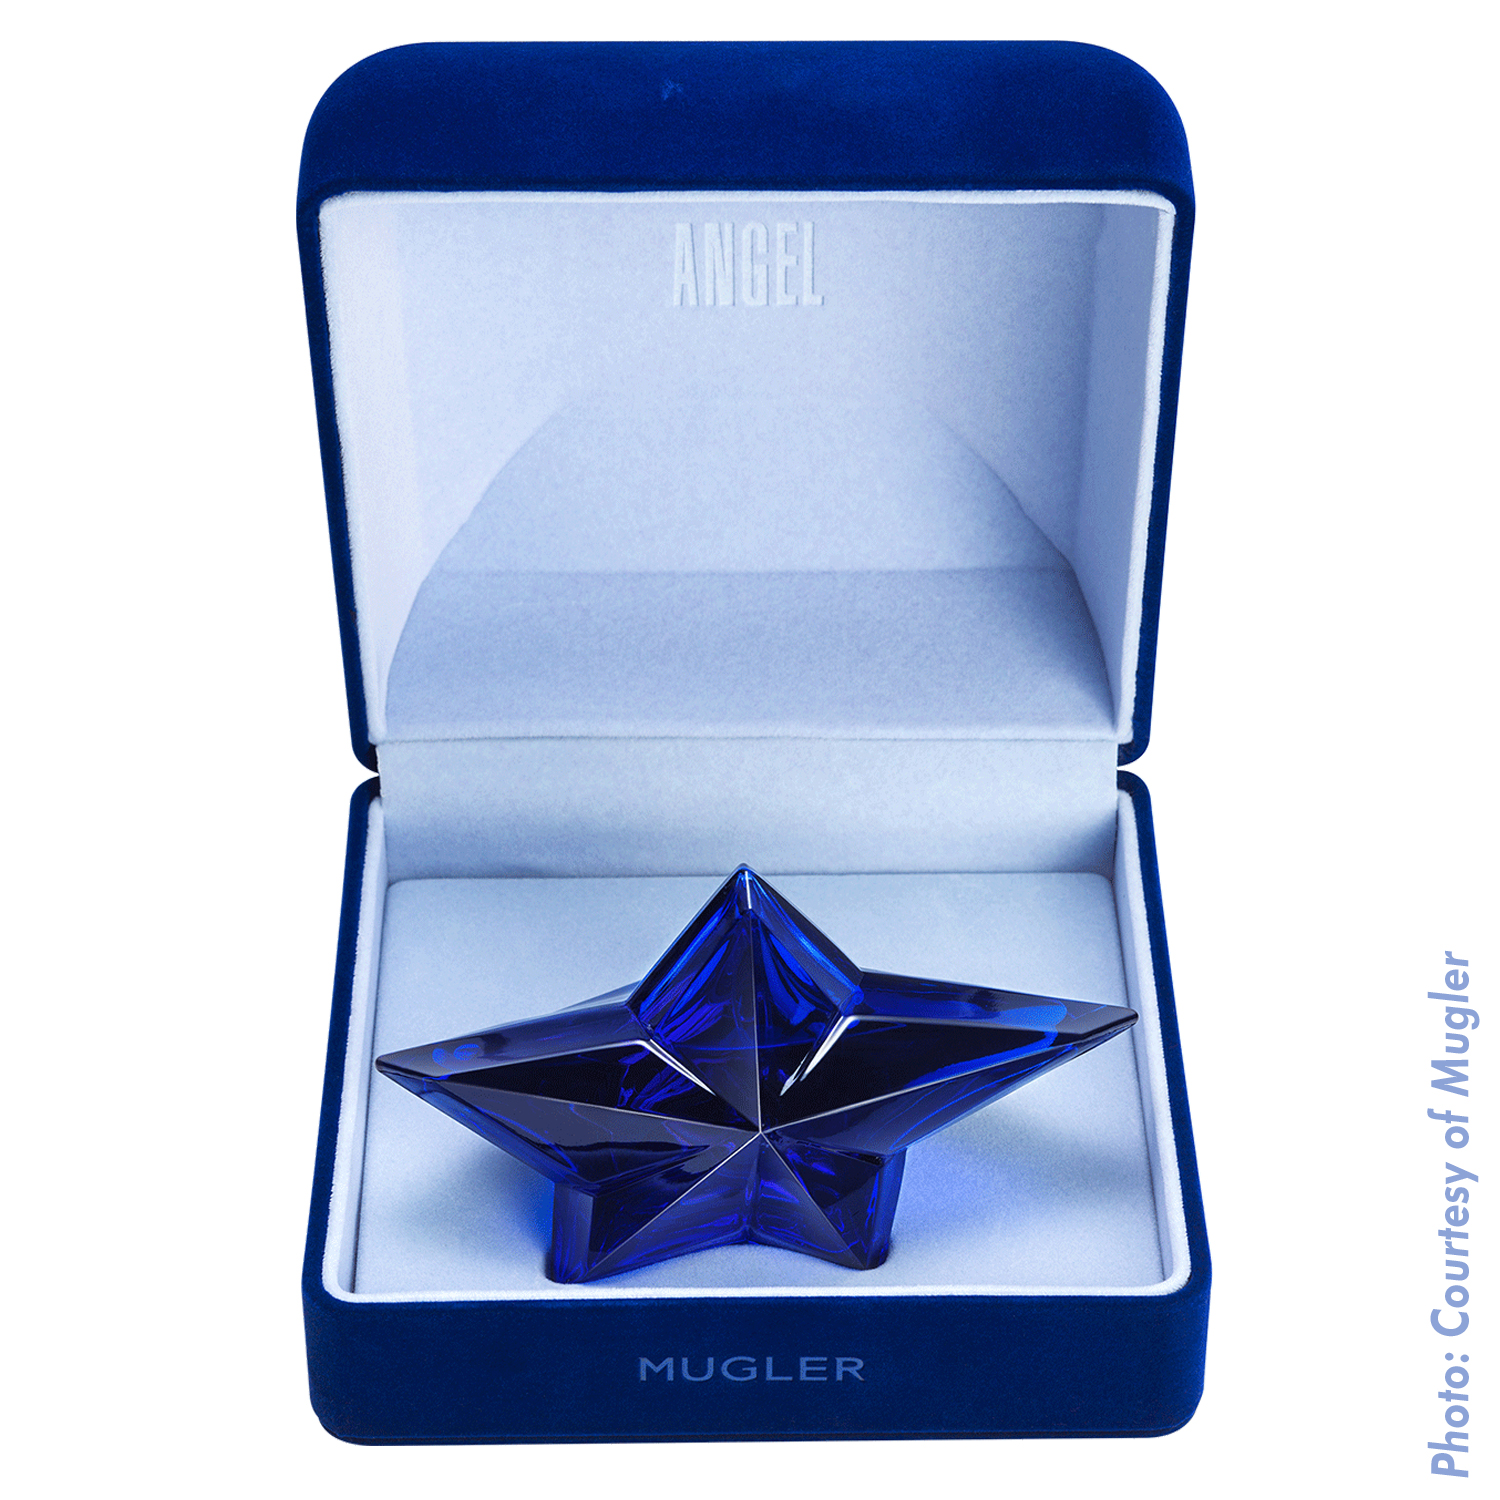 Thierry Mugler Angel Perfume Collector's Limited Edition Bottle 2017 Deep Blue Sapphire Star Velvet Box Side Display